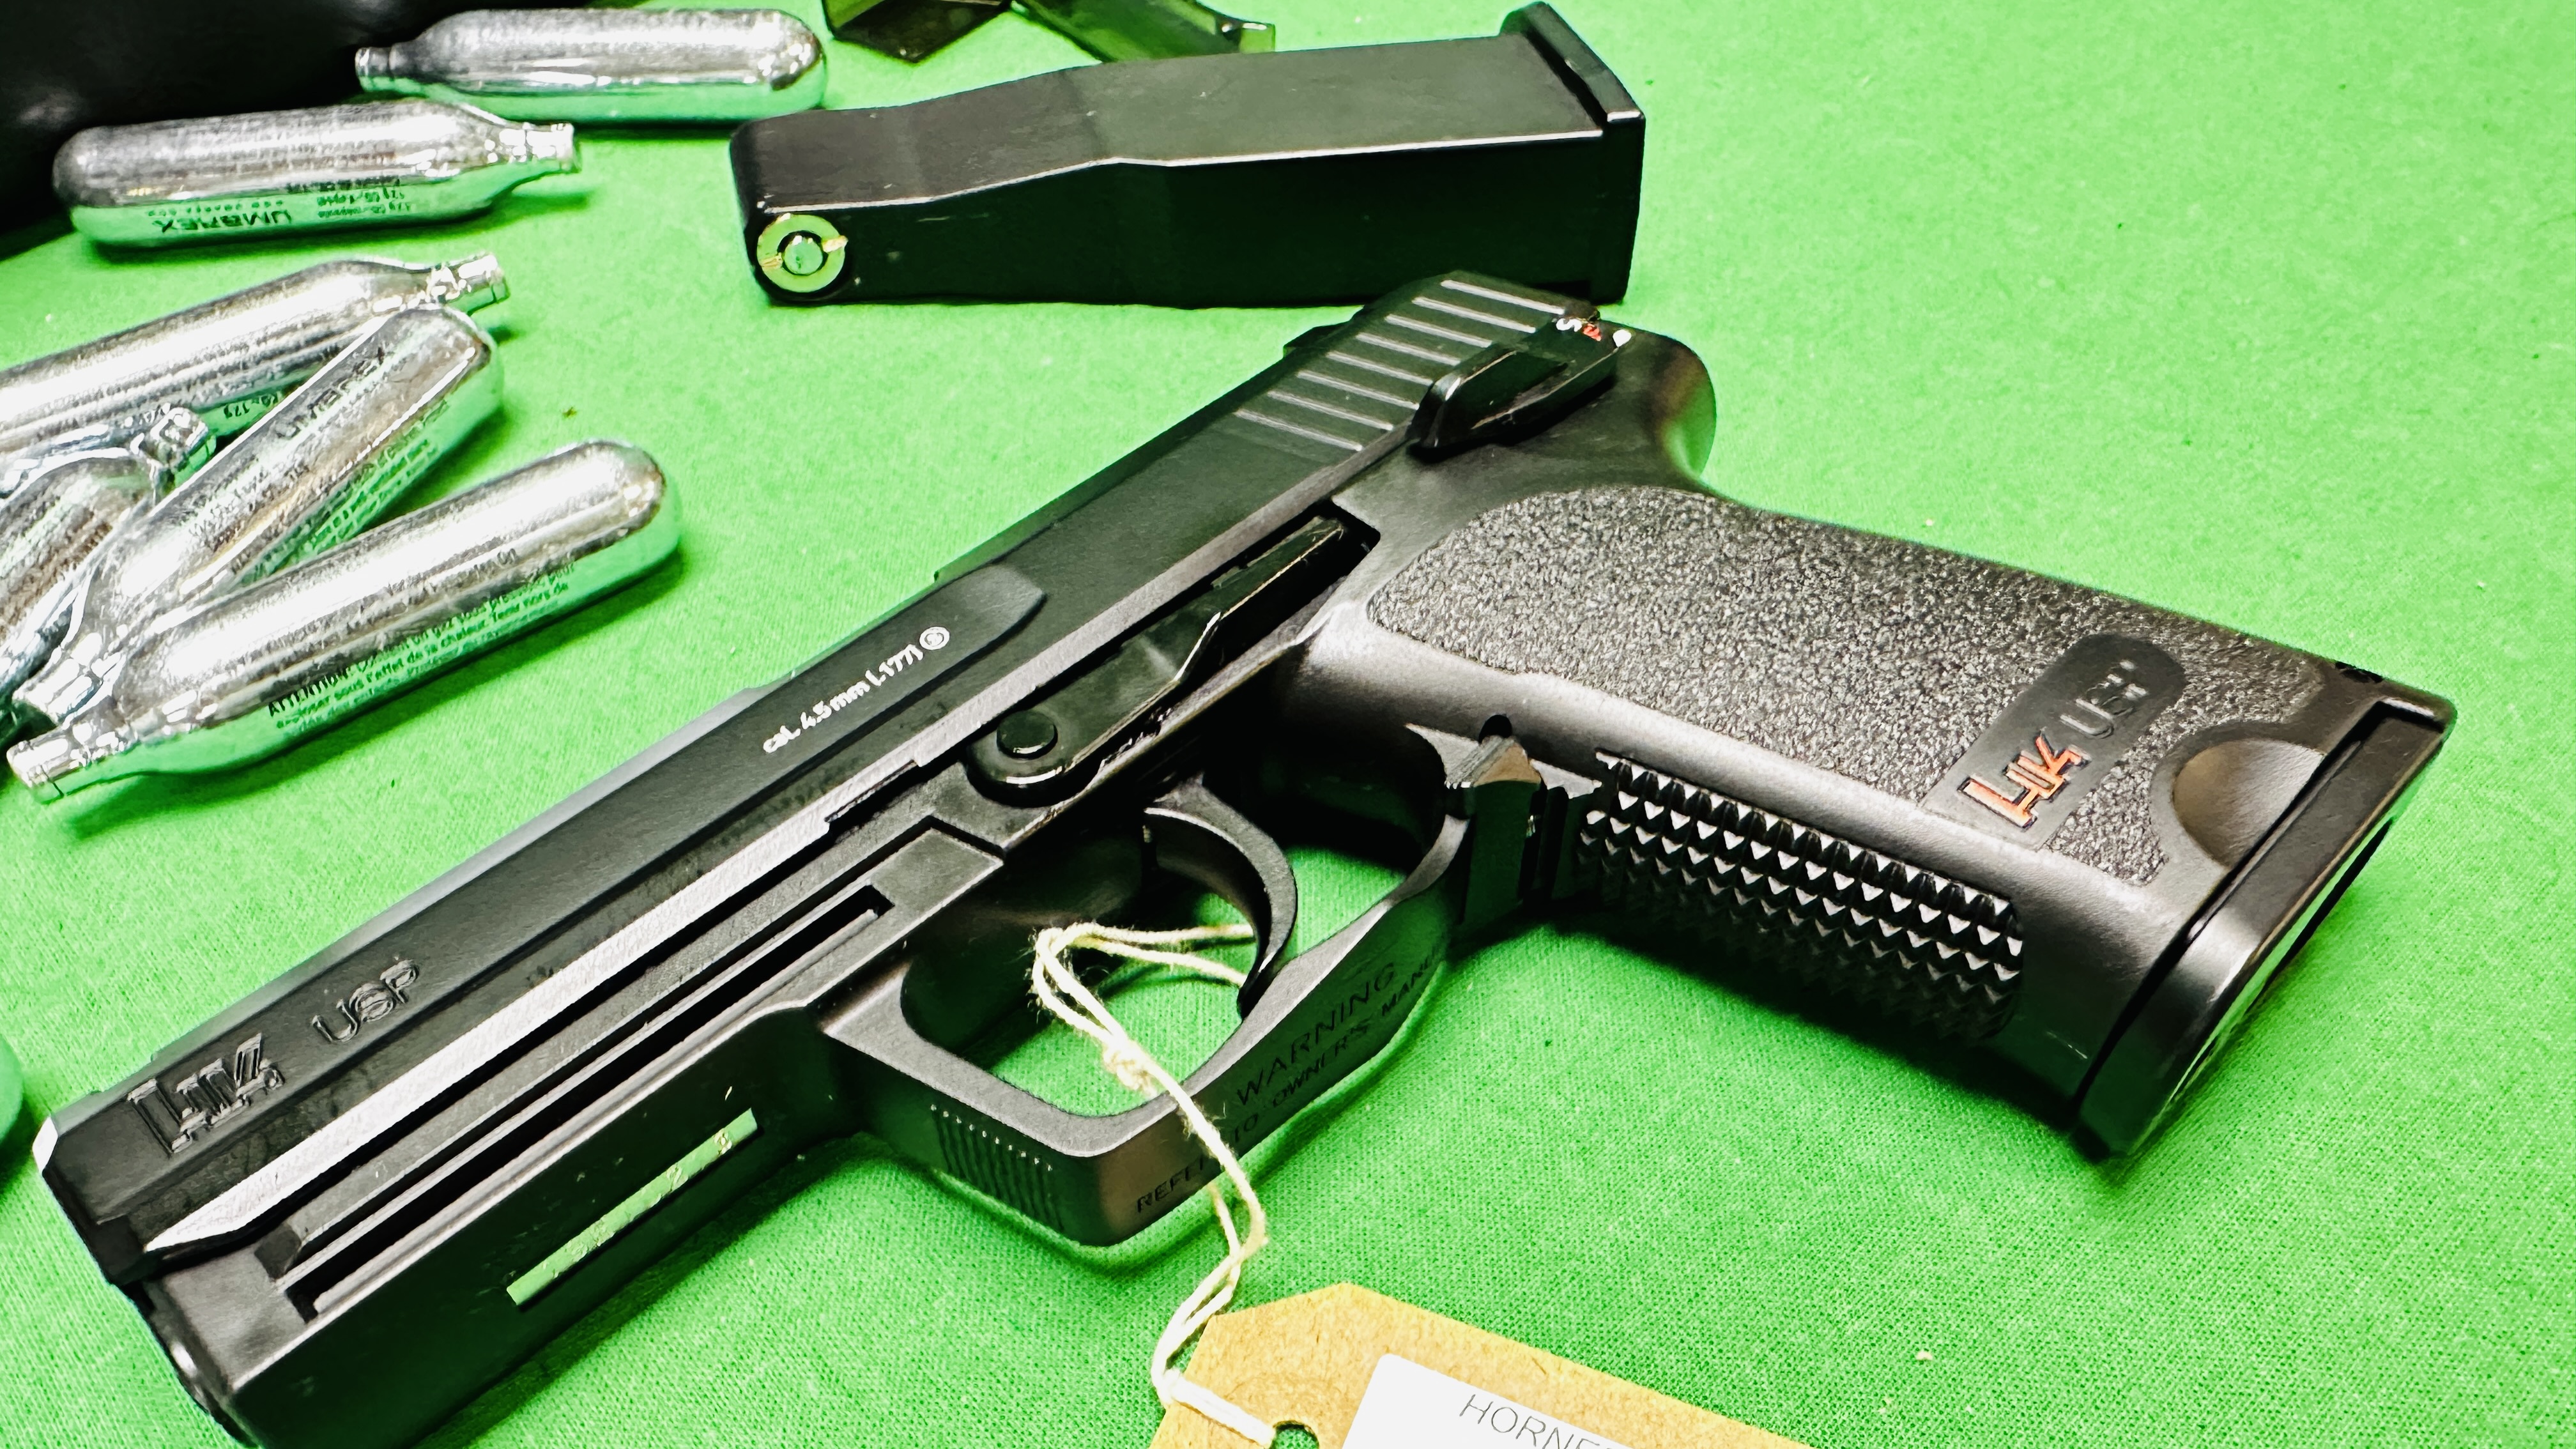 A BOXED HECKLER & KOCH USP 22 ROUND CO2 STEEL BB AIR PISTOL COMPLETE WITH HARD TRANSIT CASE, - Image 5 of 15